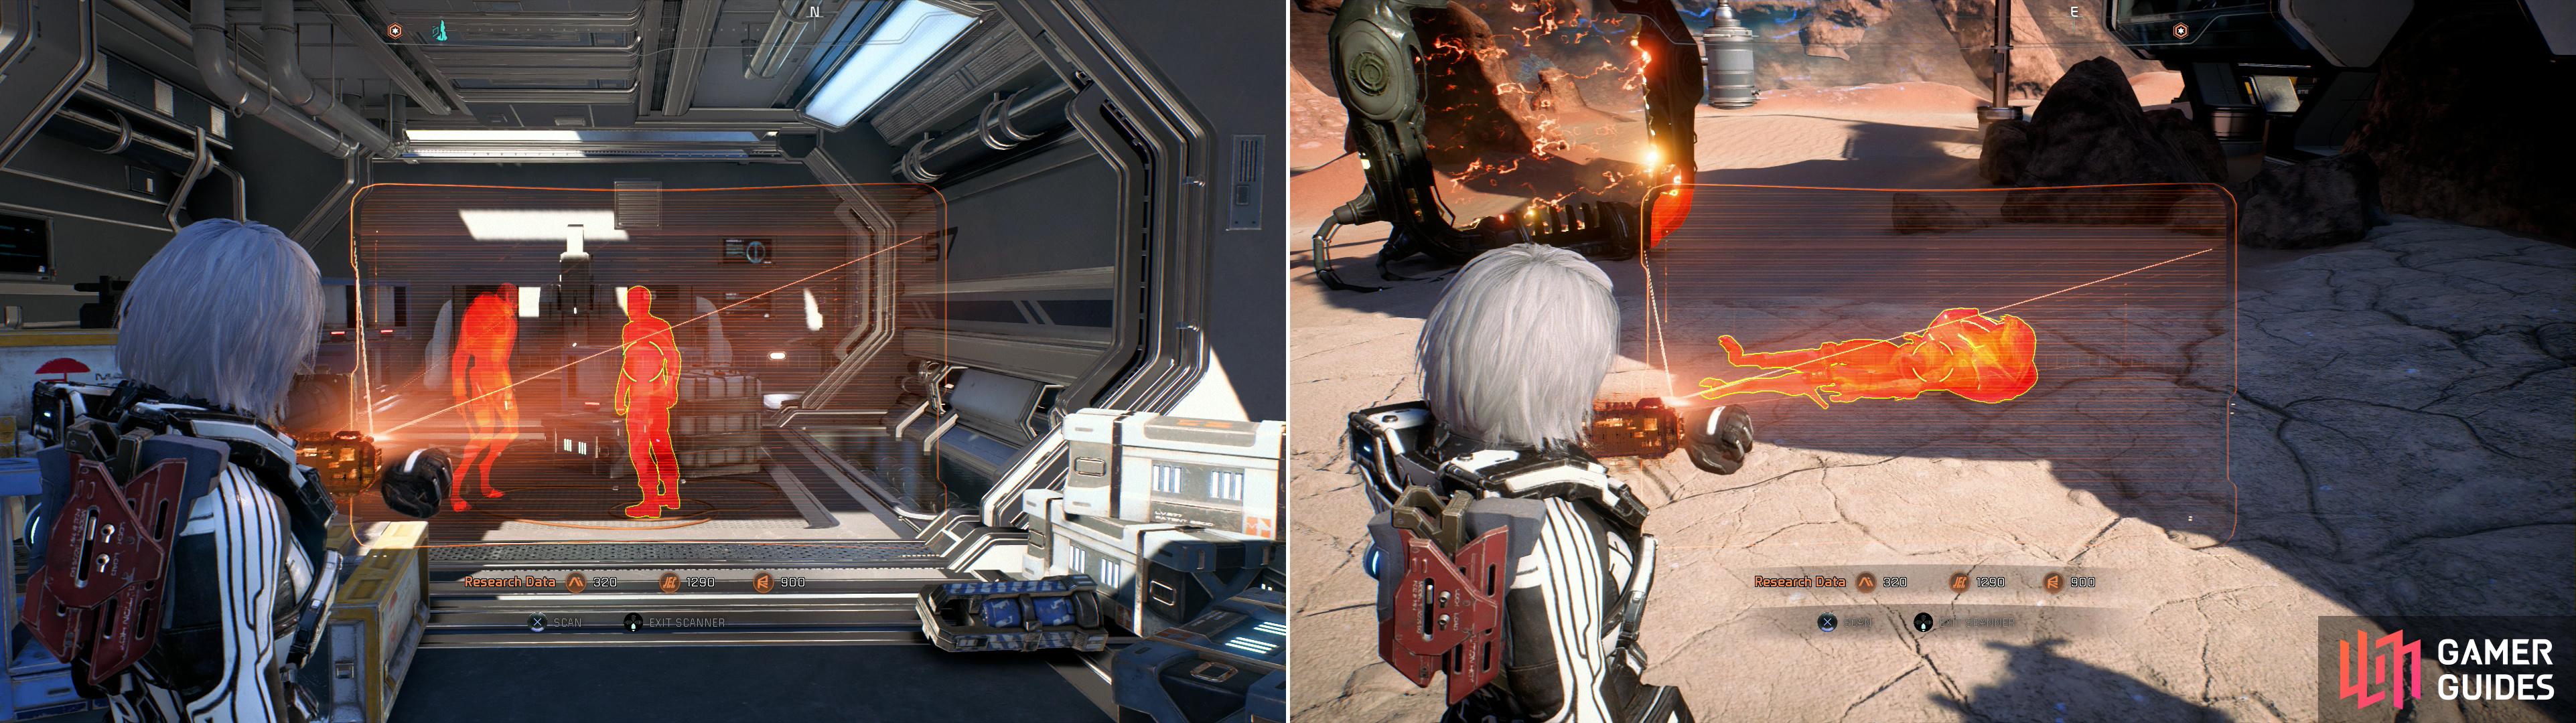 Scan domiciles in Site 2 to reconstruct the colony's final moments (left). You can also find numerous bodies scattered about for the quest "Task: Naming the Dead" (right).